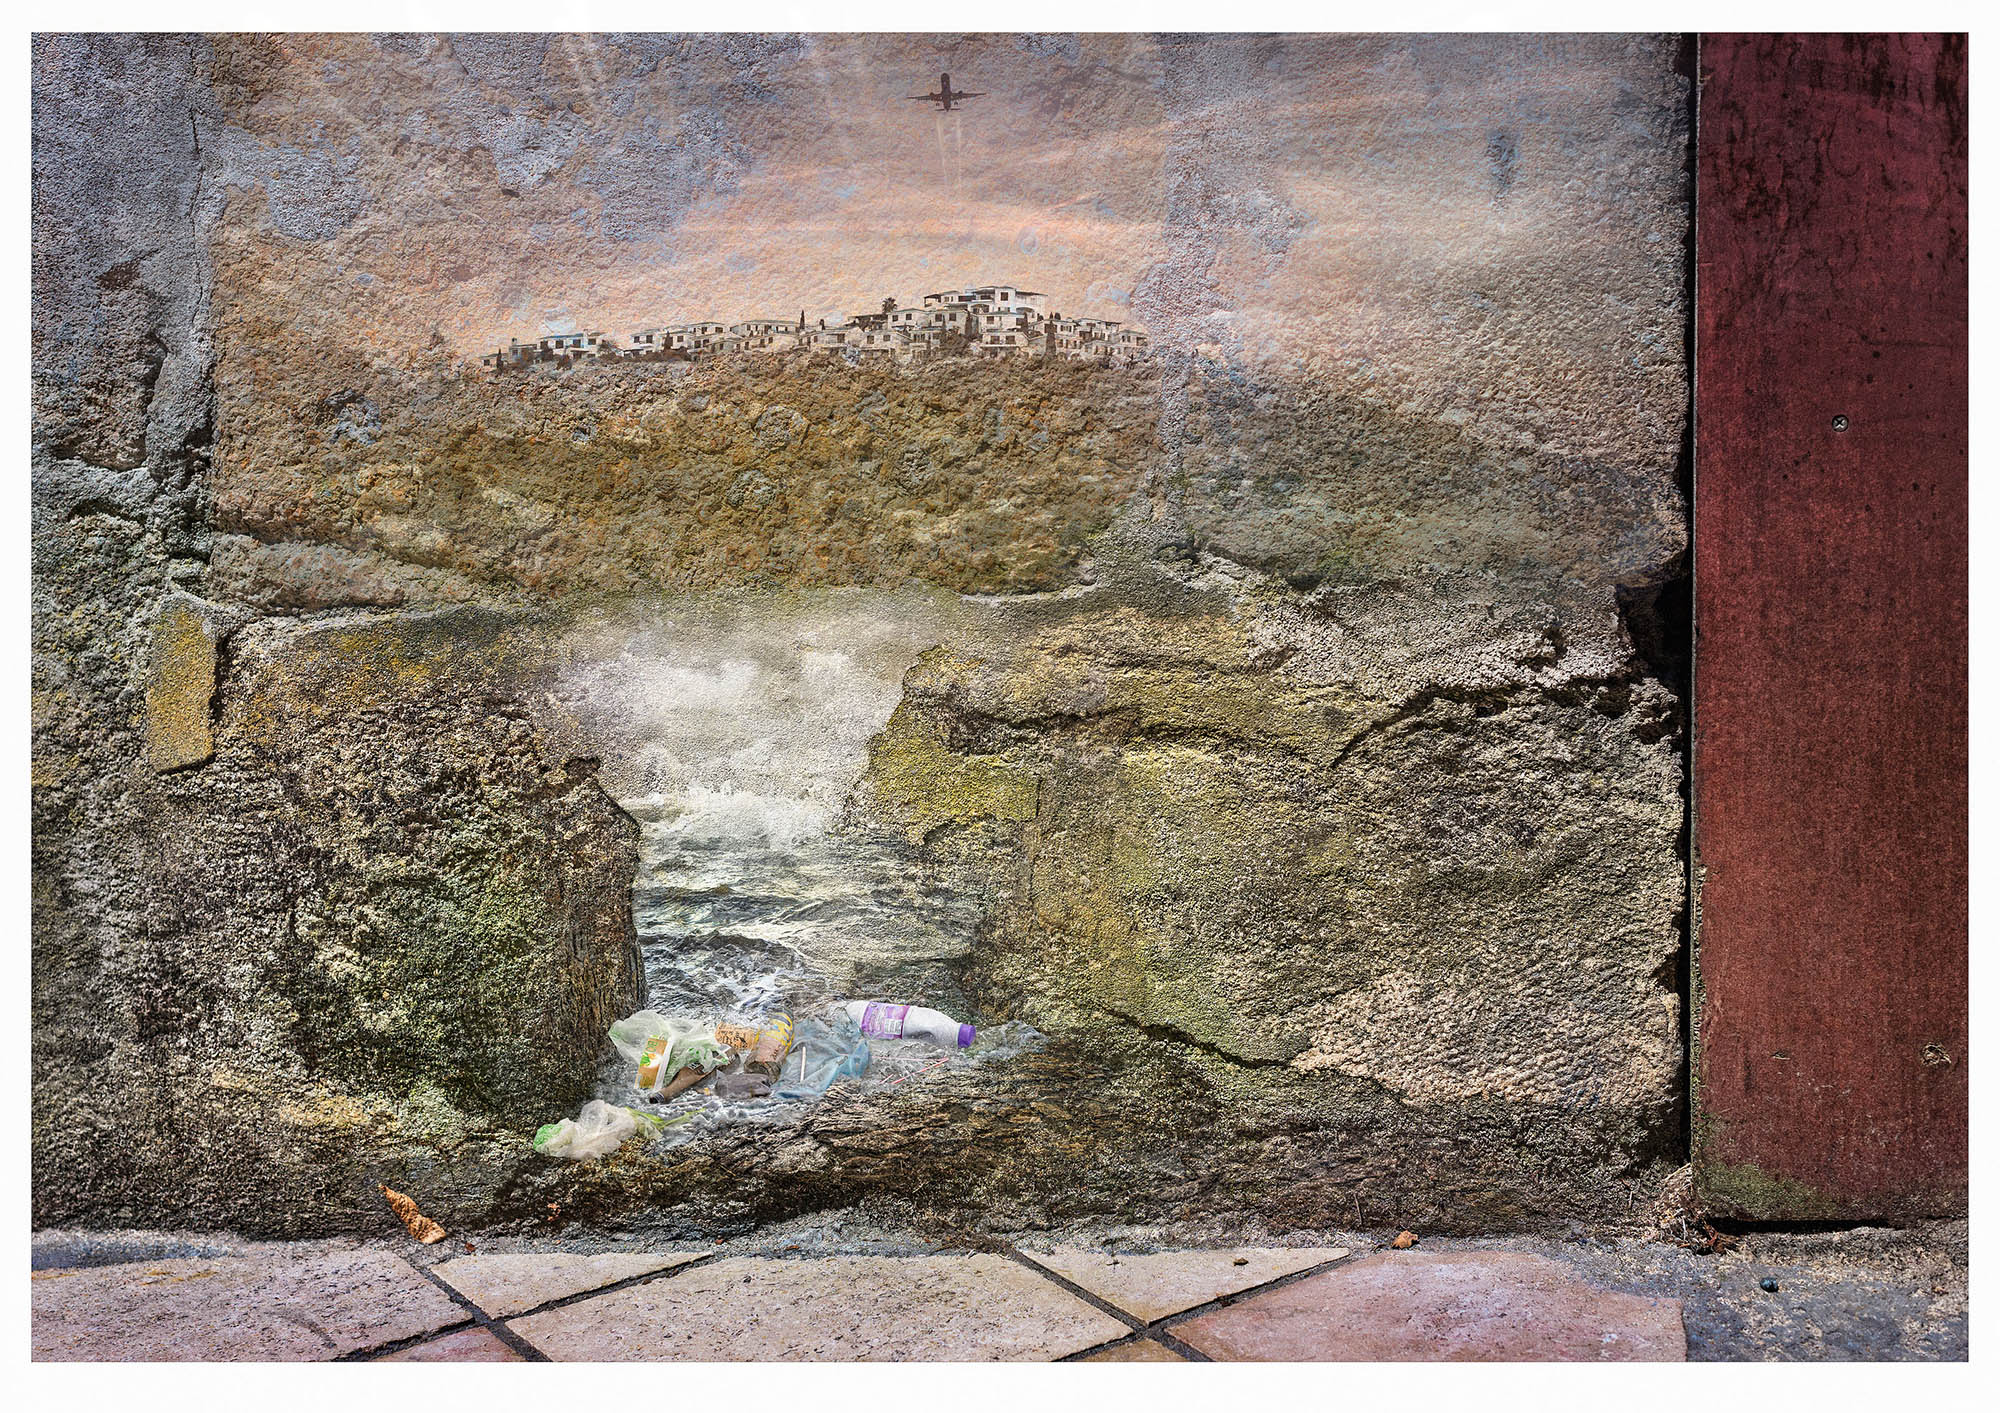 Composite photograph of weathered wall part painted blue, bottom right black and dirty.A building site with cranes, two deer sky and a fingerprint have been added to create an urban landscape image to criticise human involvment